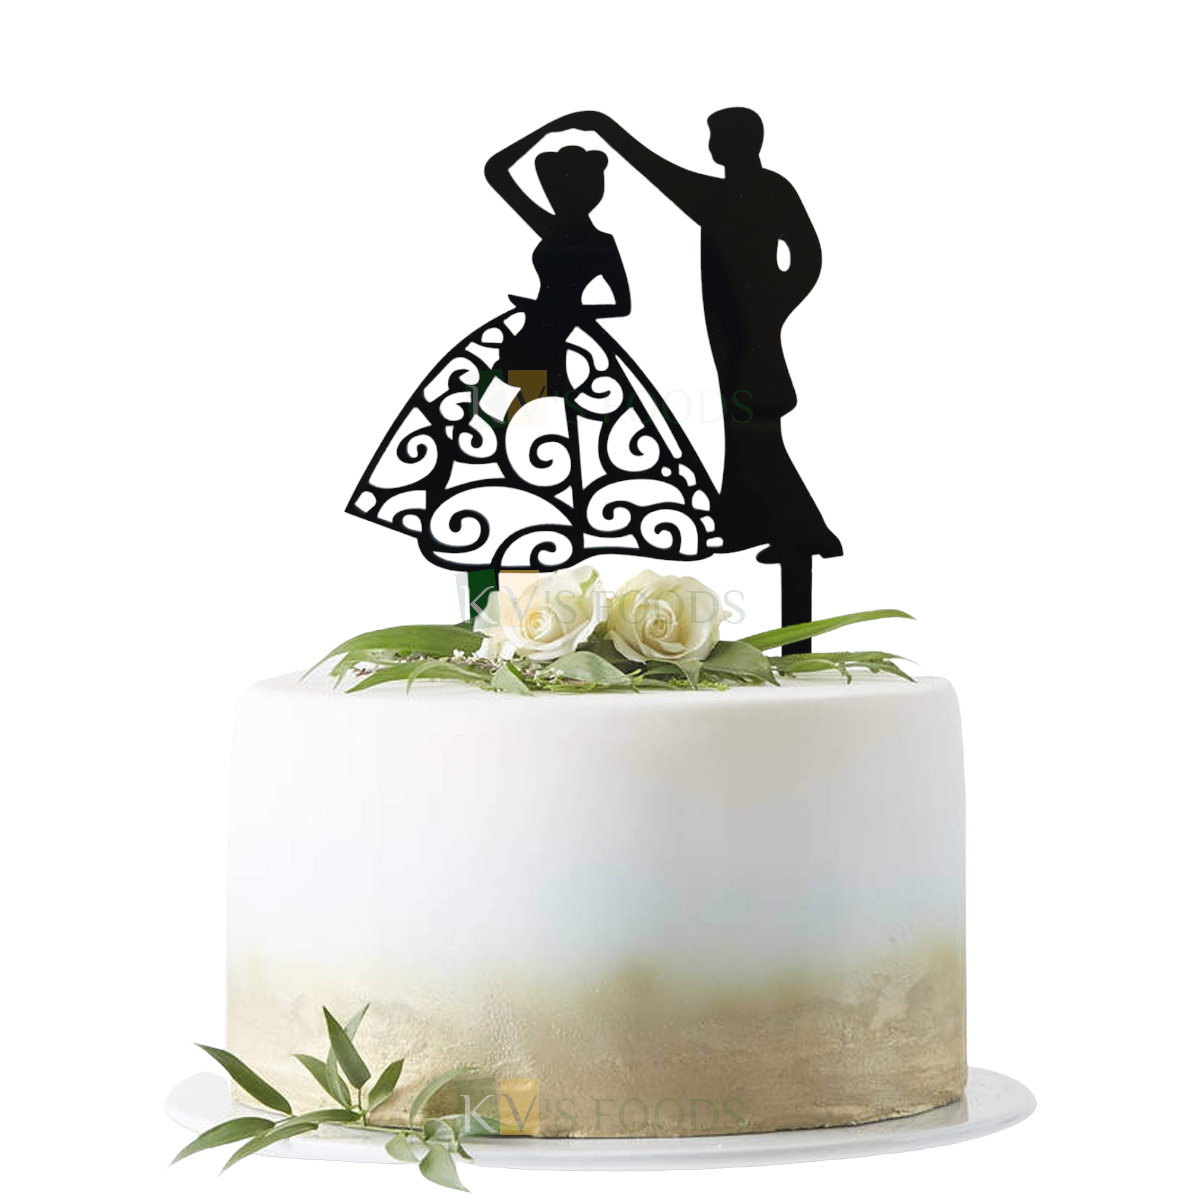 1PC Black Acrylic Dancing Dressed Up Bride and Groom Cake Topper, Romantic  Couples Engagement Cake Insert,